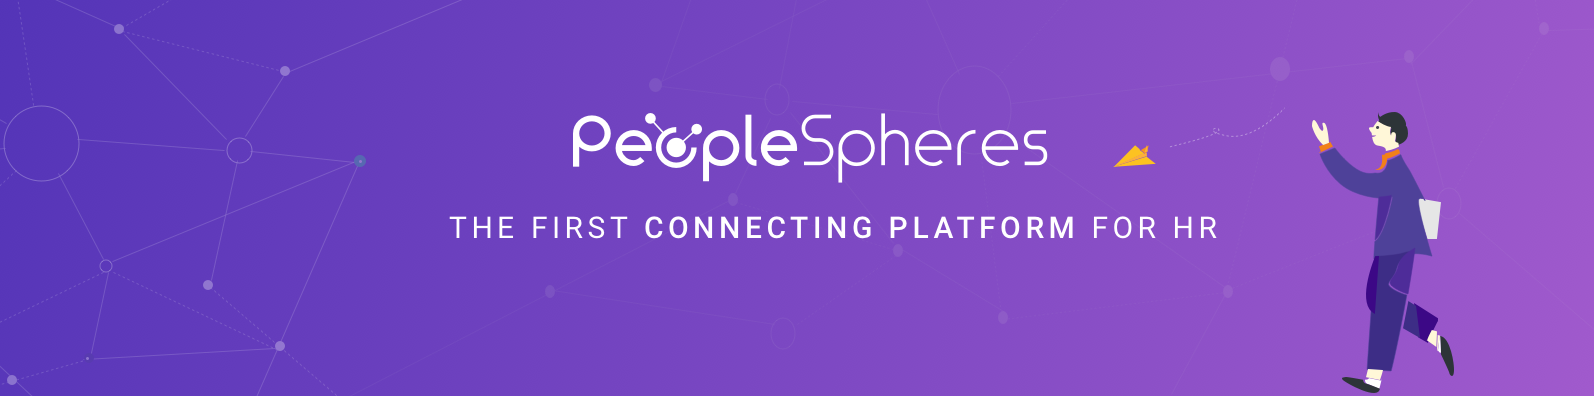 Review PeopleSpheres: The People Platform built to deliver HR your way - Appvizer